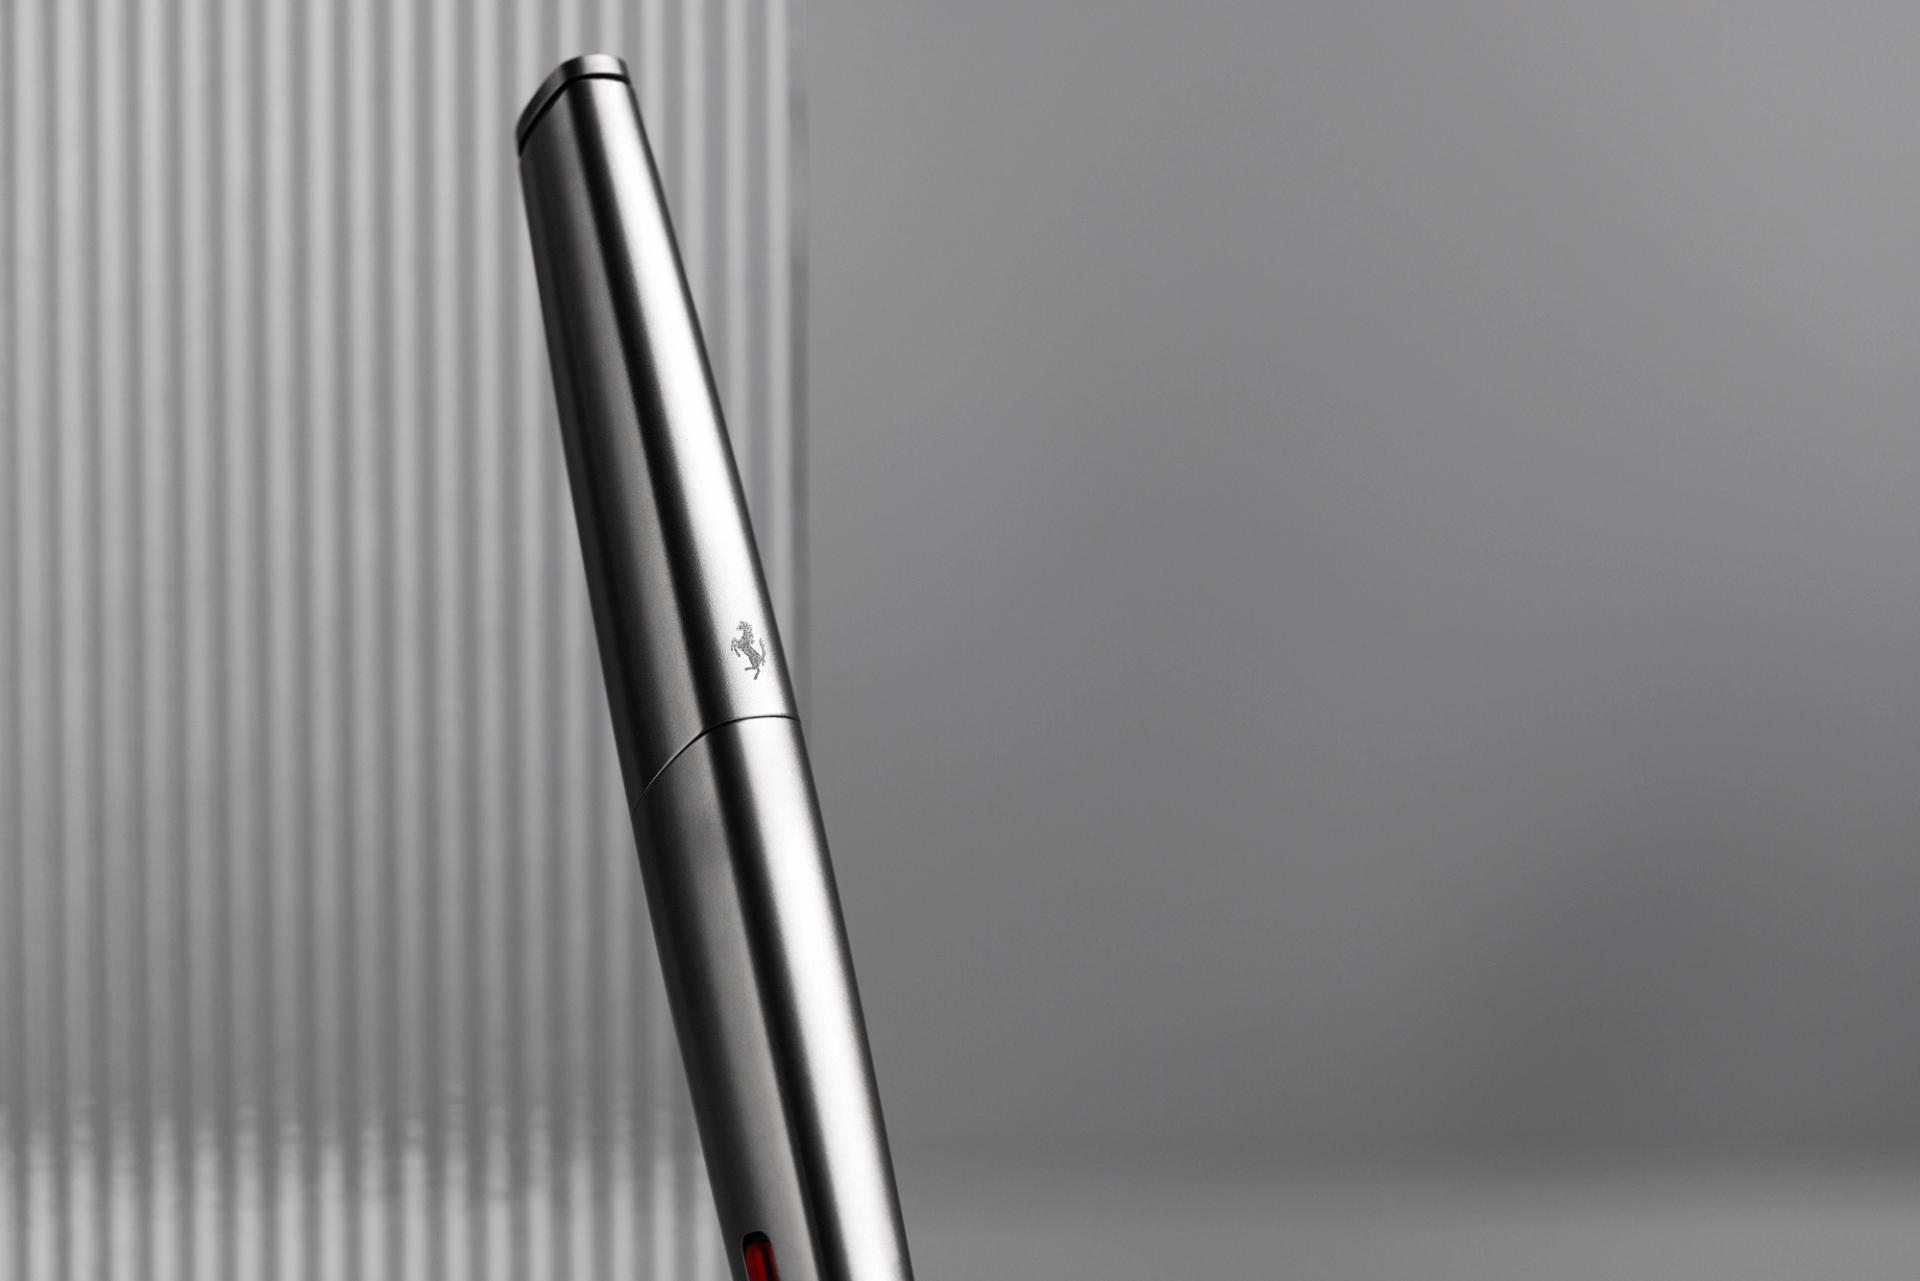 Objects of Our Time: The Montblanc x Ferrari Pen